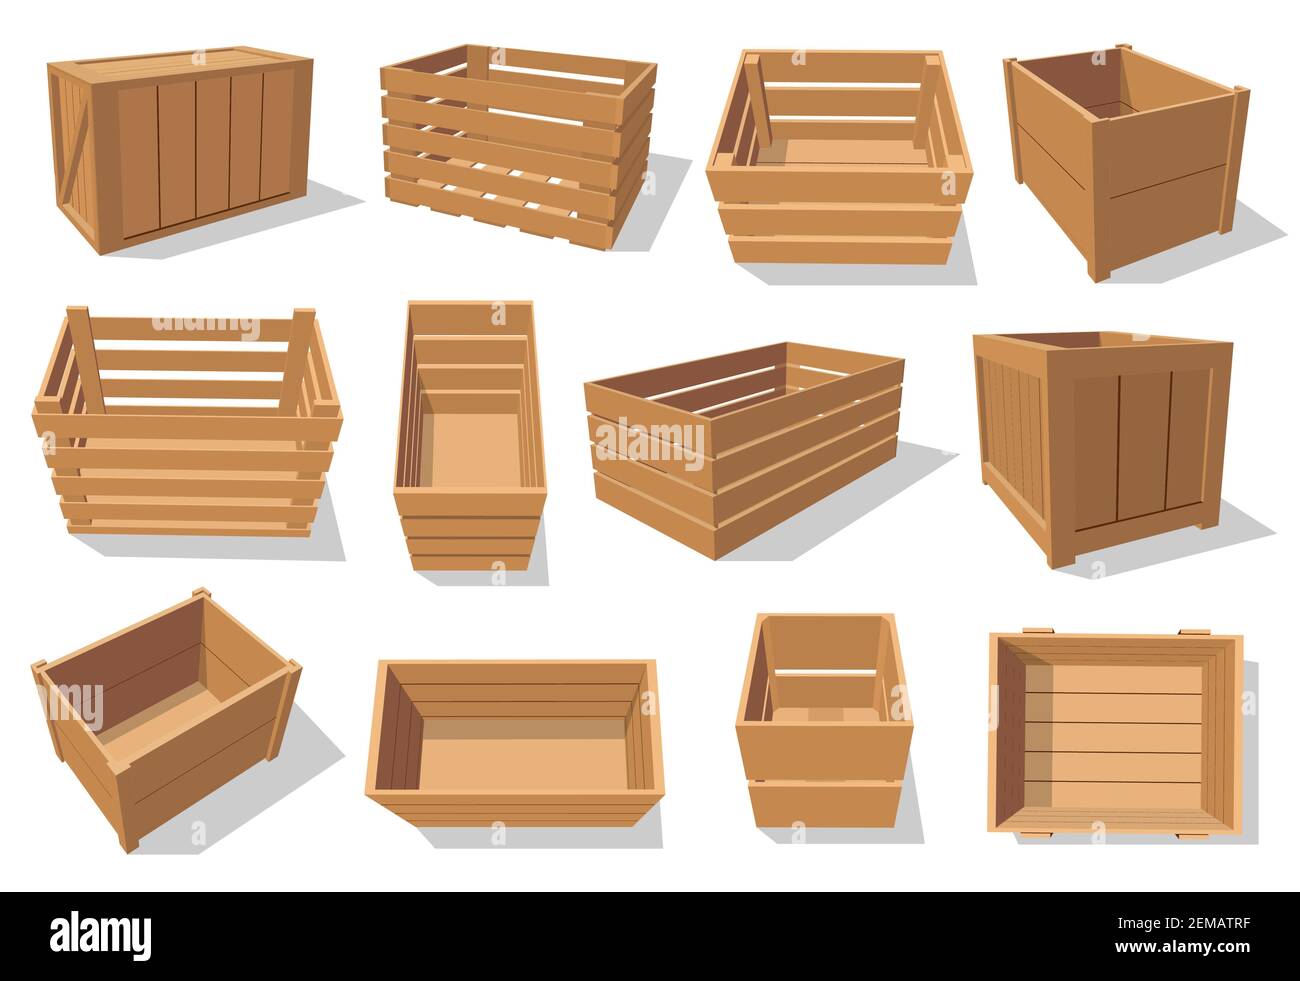 Wooden crates and boxes, cargo shipping containers vector isolated objects. Open pallets, empty wood baskets and packages, warehouse storage, delivery Stock Vector